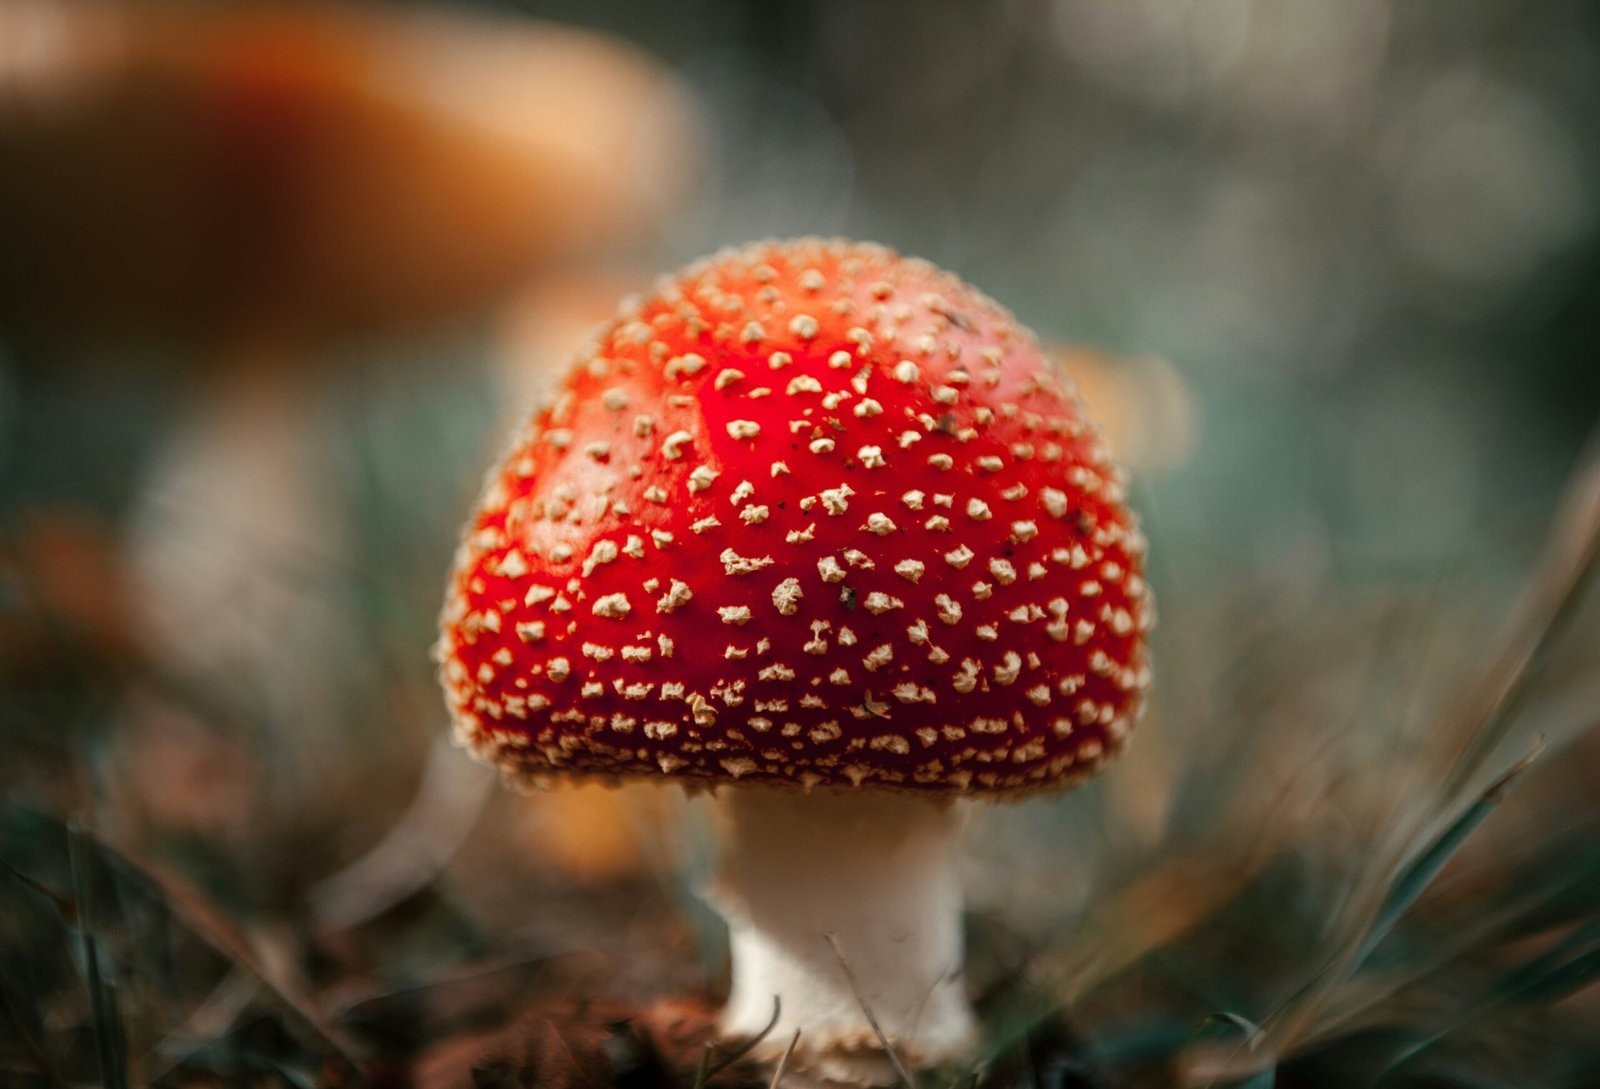 Unregulated sales of a toxic and hallucinogenic mushroom endanger public health, says study